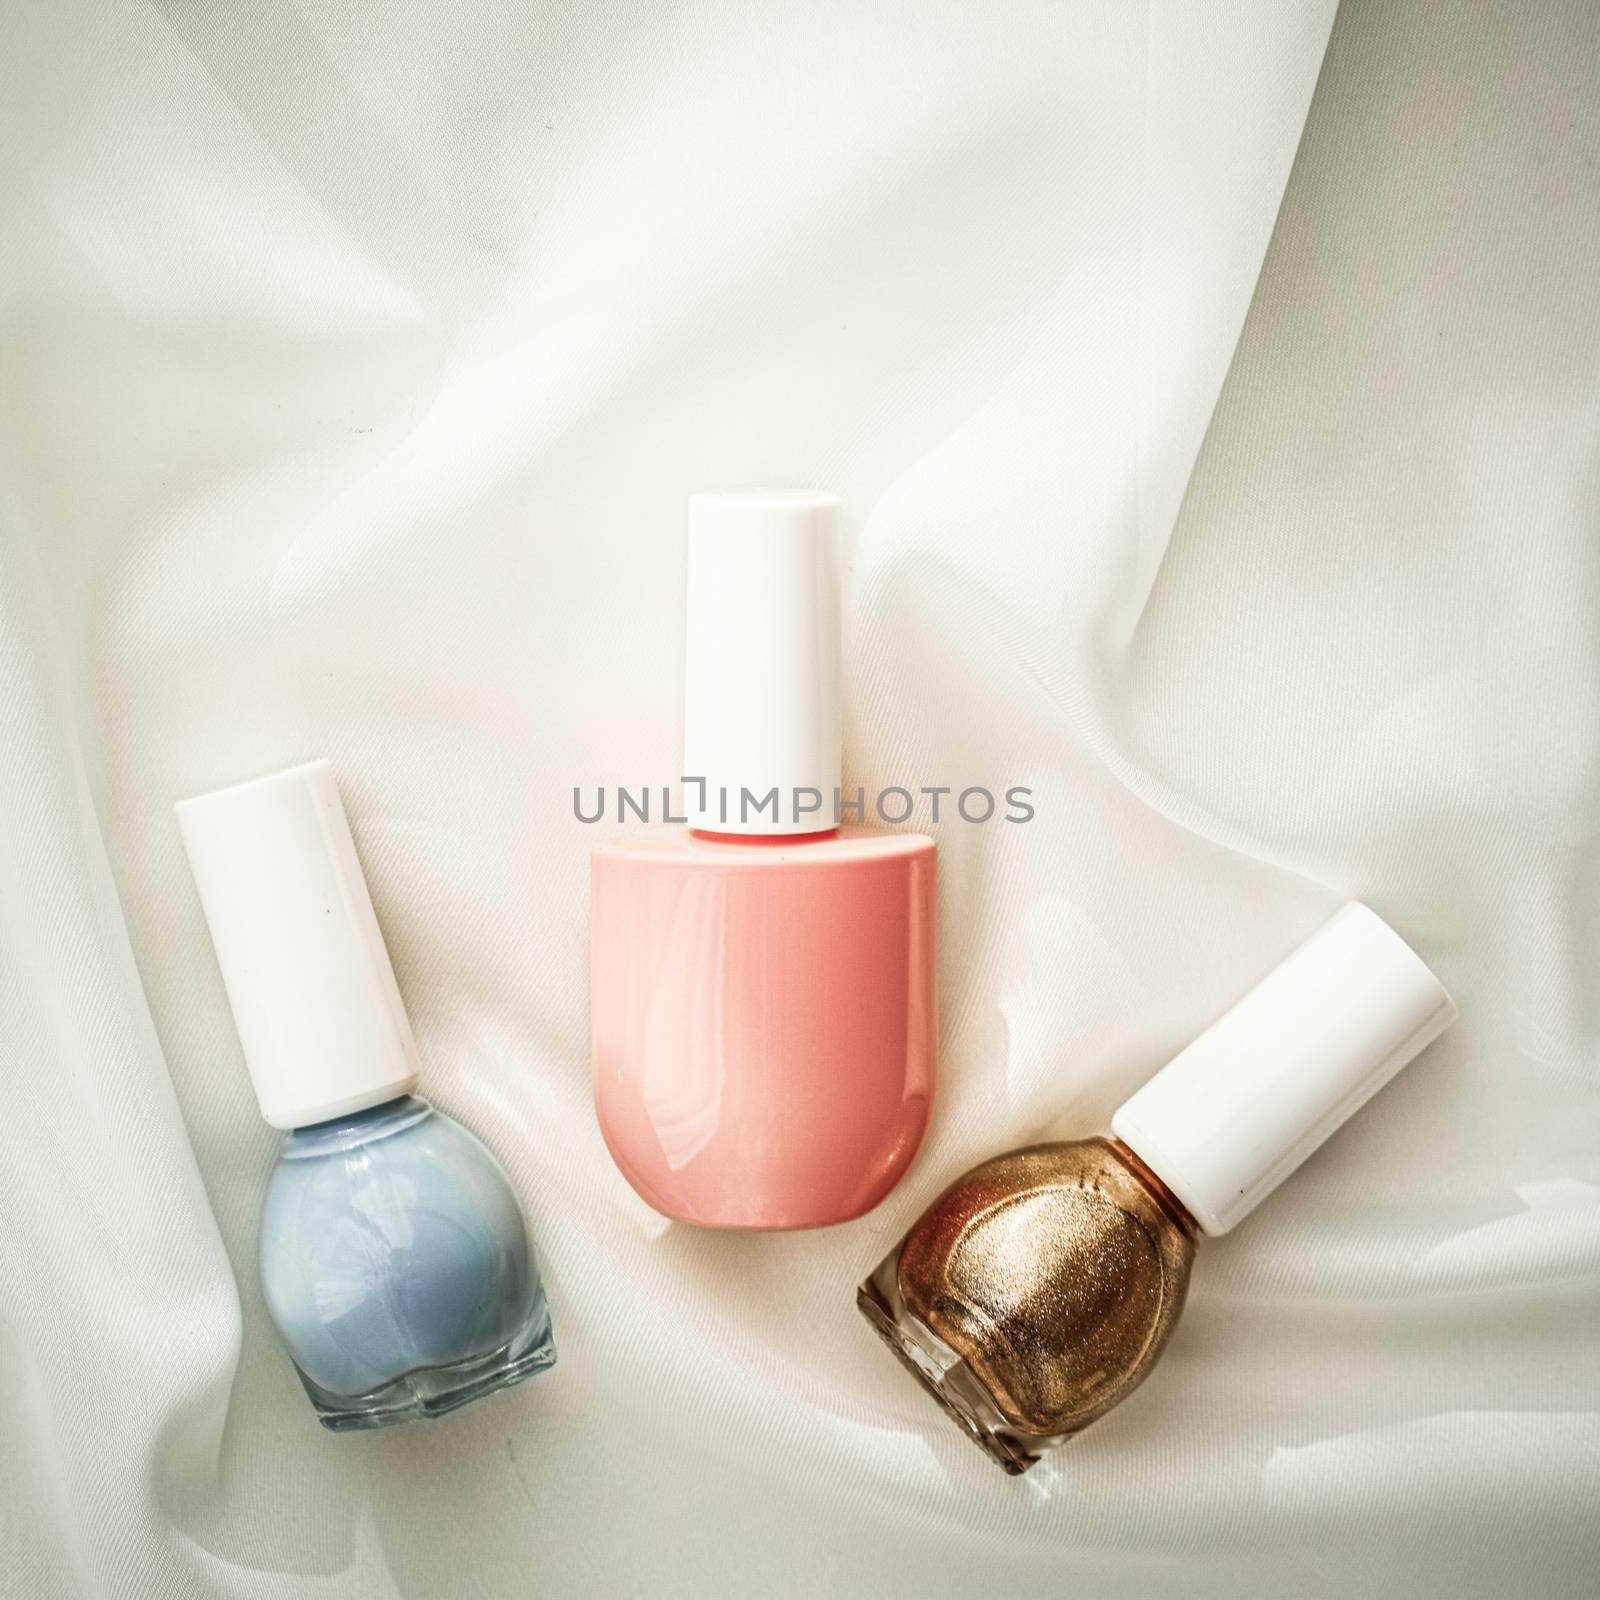 Nail polish bottles on silk background, french manicure products by Anneleven